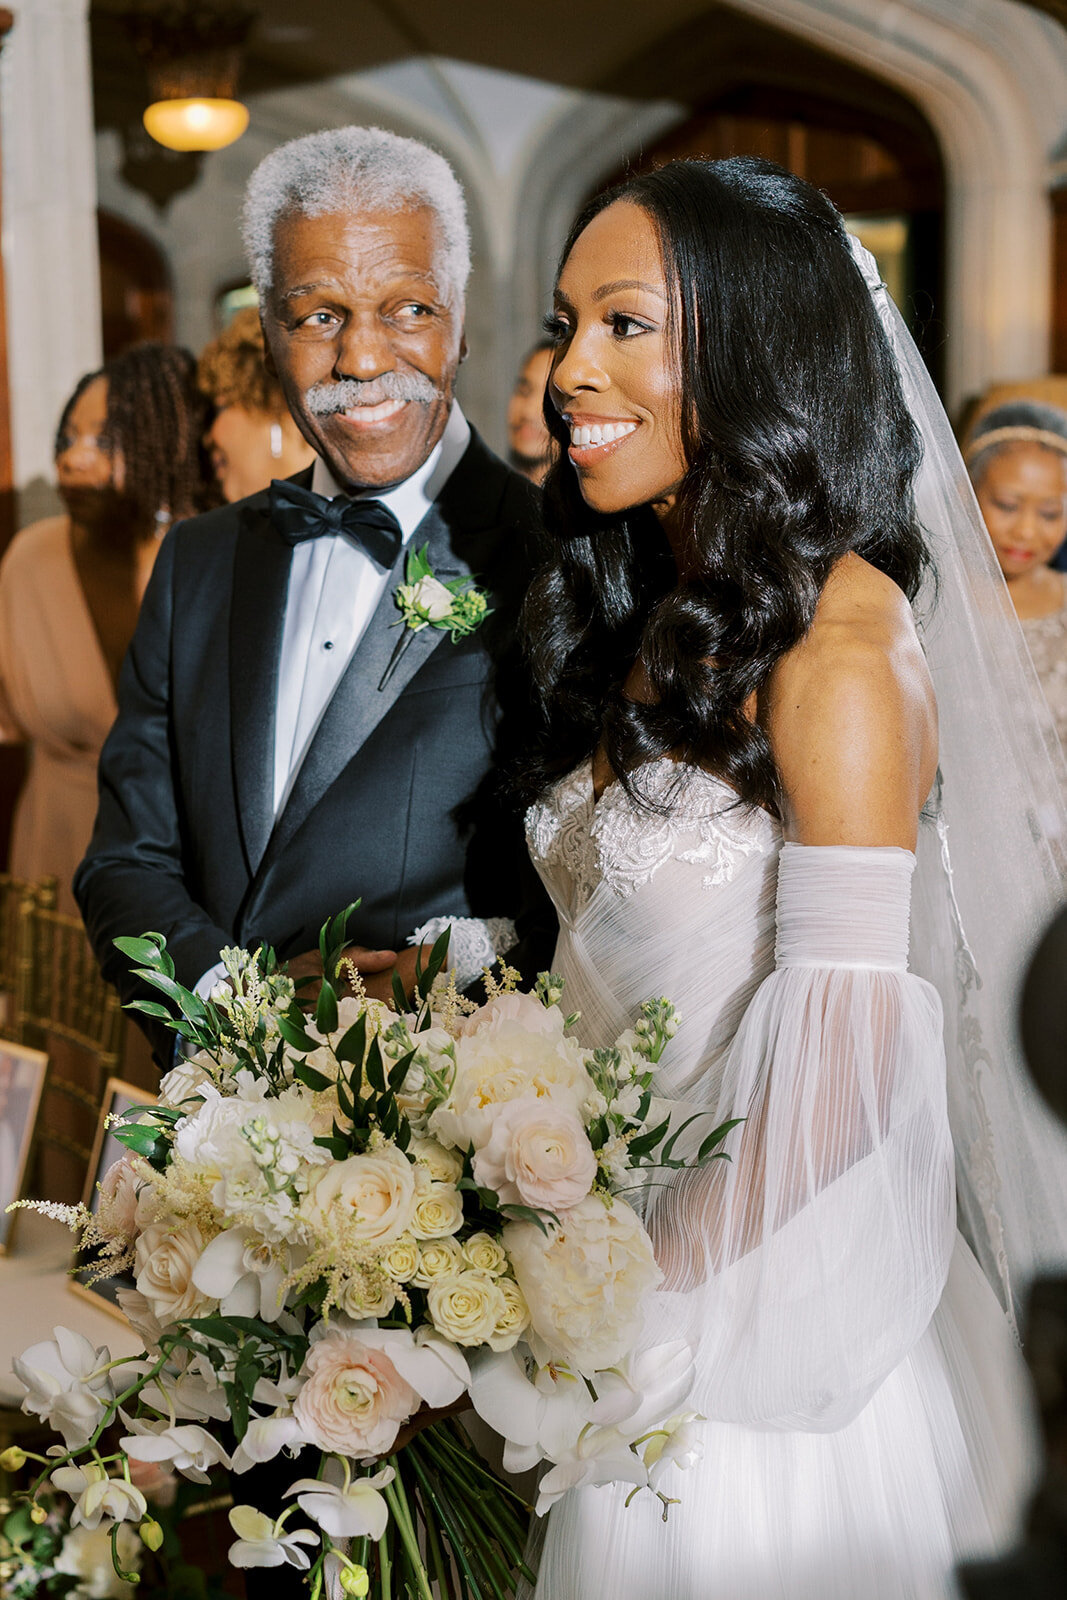 father-gazing-at-daughter-as-she-looks-at-groom-as-she-walks-down-the-aisle-at-callanwolde-atlanta-elizabeth-austin-photography.jpg